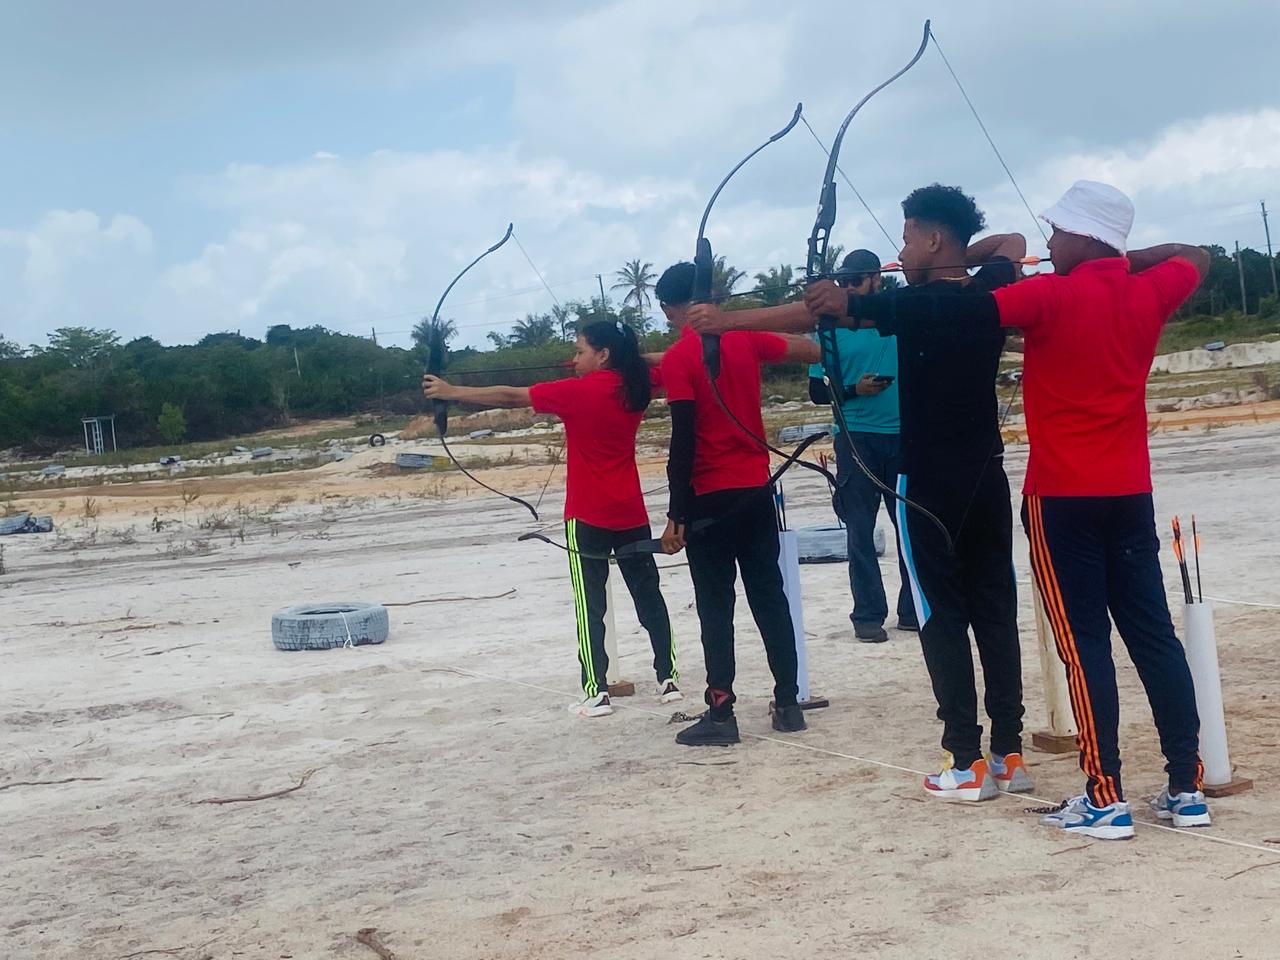 Competitors from ‘DeChief Archery Club’ and ‘Essequibo Archers'